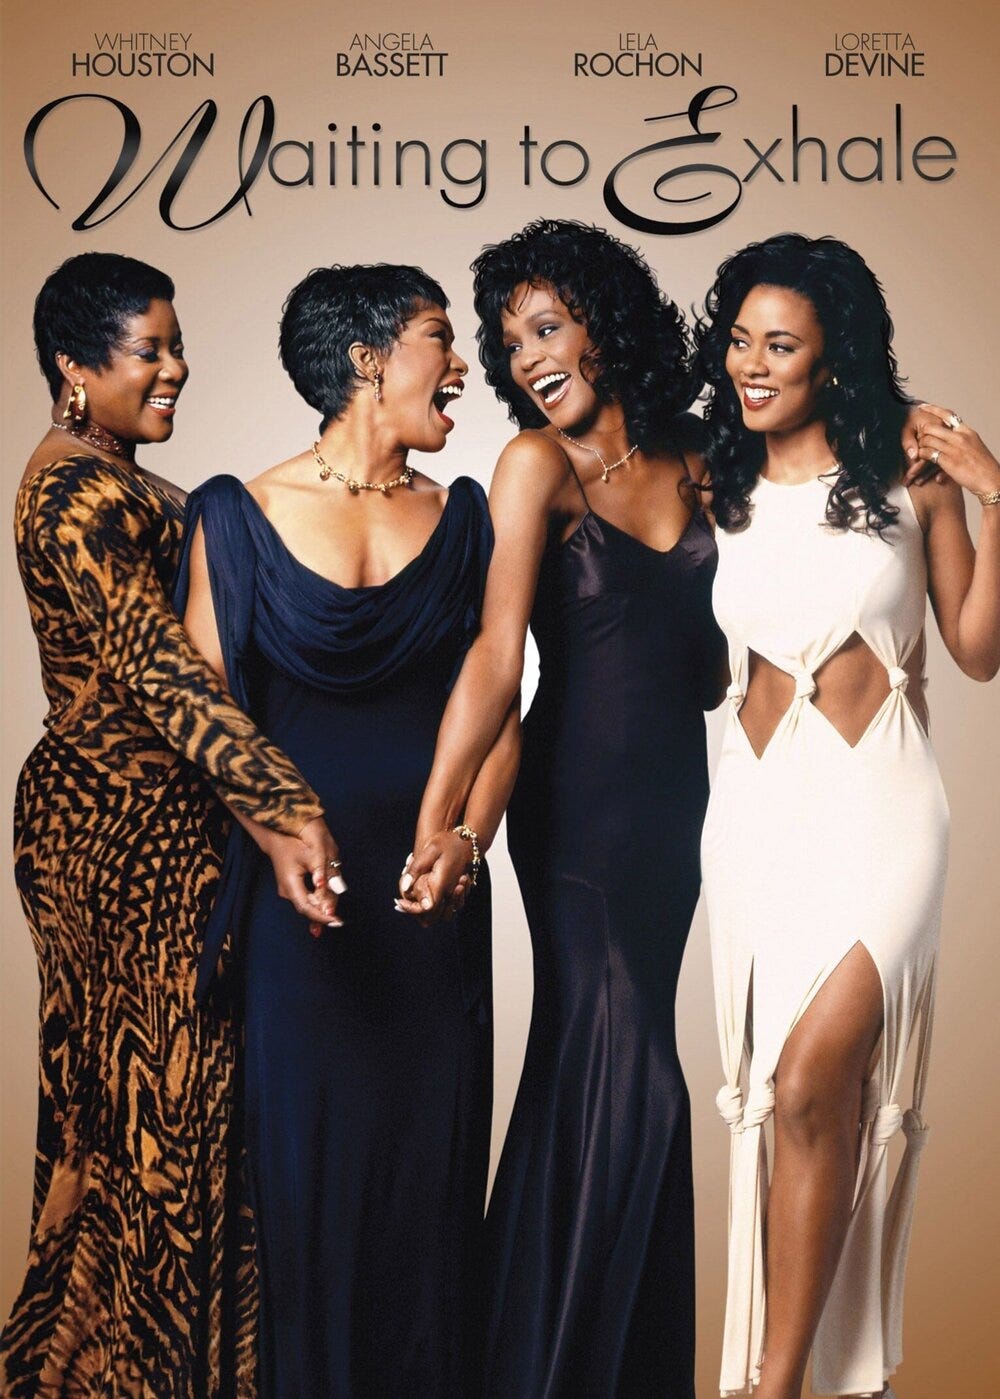 I only recently watched this 90s gem and was pleasantly surprised. It’s not to say that there are not flaws here, but Waiting to Exhale makes up the flaws for the wonderful cast and original filmmaking. (Shoutout to the Queens doing their thing - Loretta Devine and Angela Bassett)  Available now to rent.